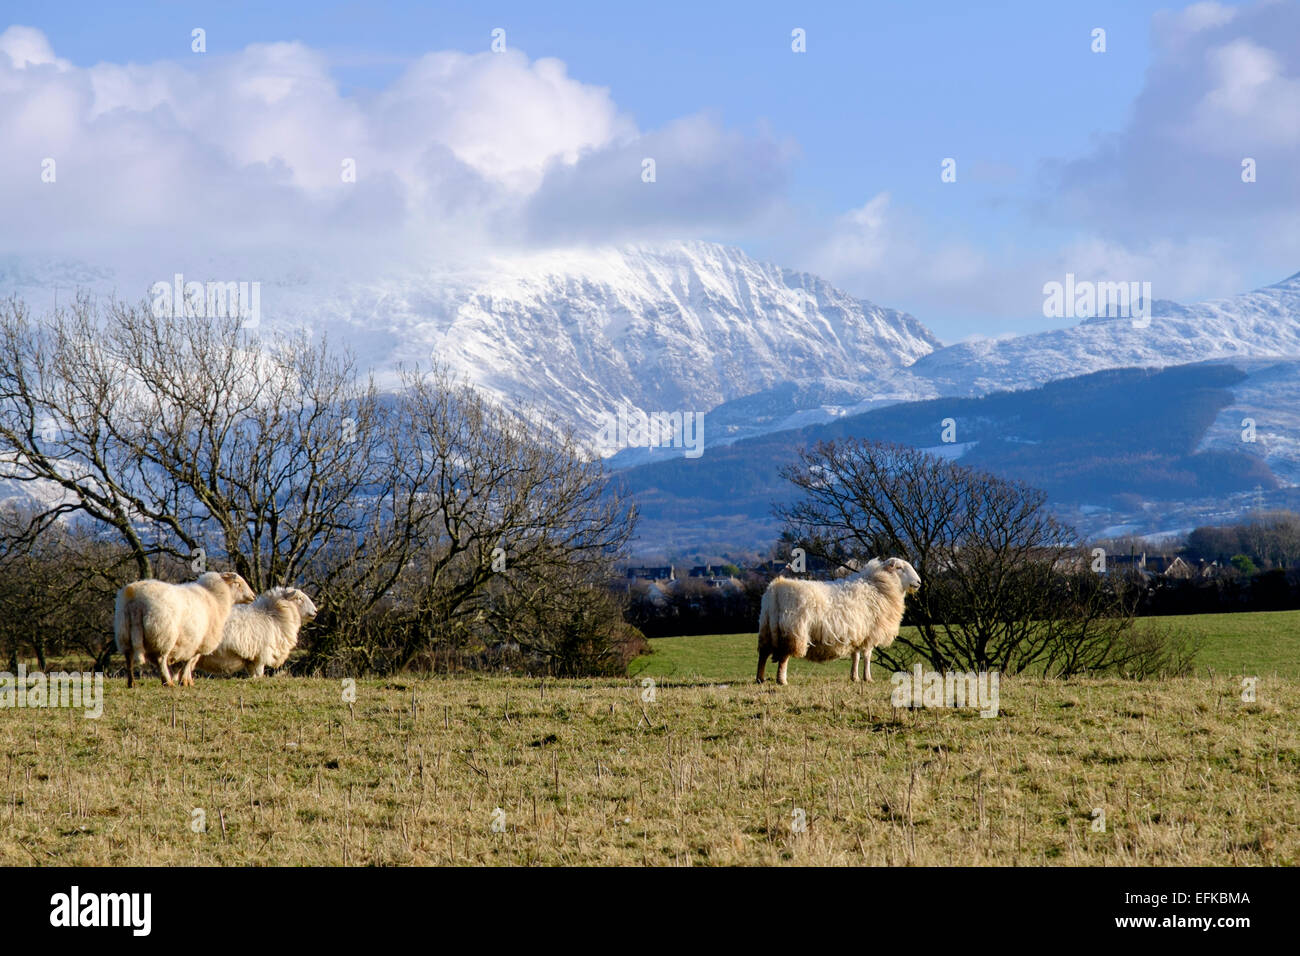 Sheep in a field with view to snow on Carneddau mountains of Snowdonia beyond. Llanfair PG Isle of Anglesey Wales UK Britain Stock Photo